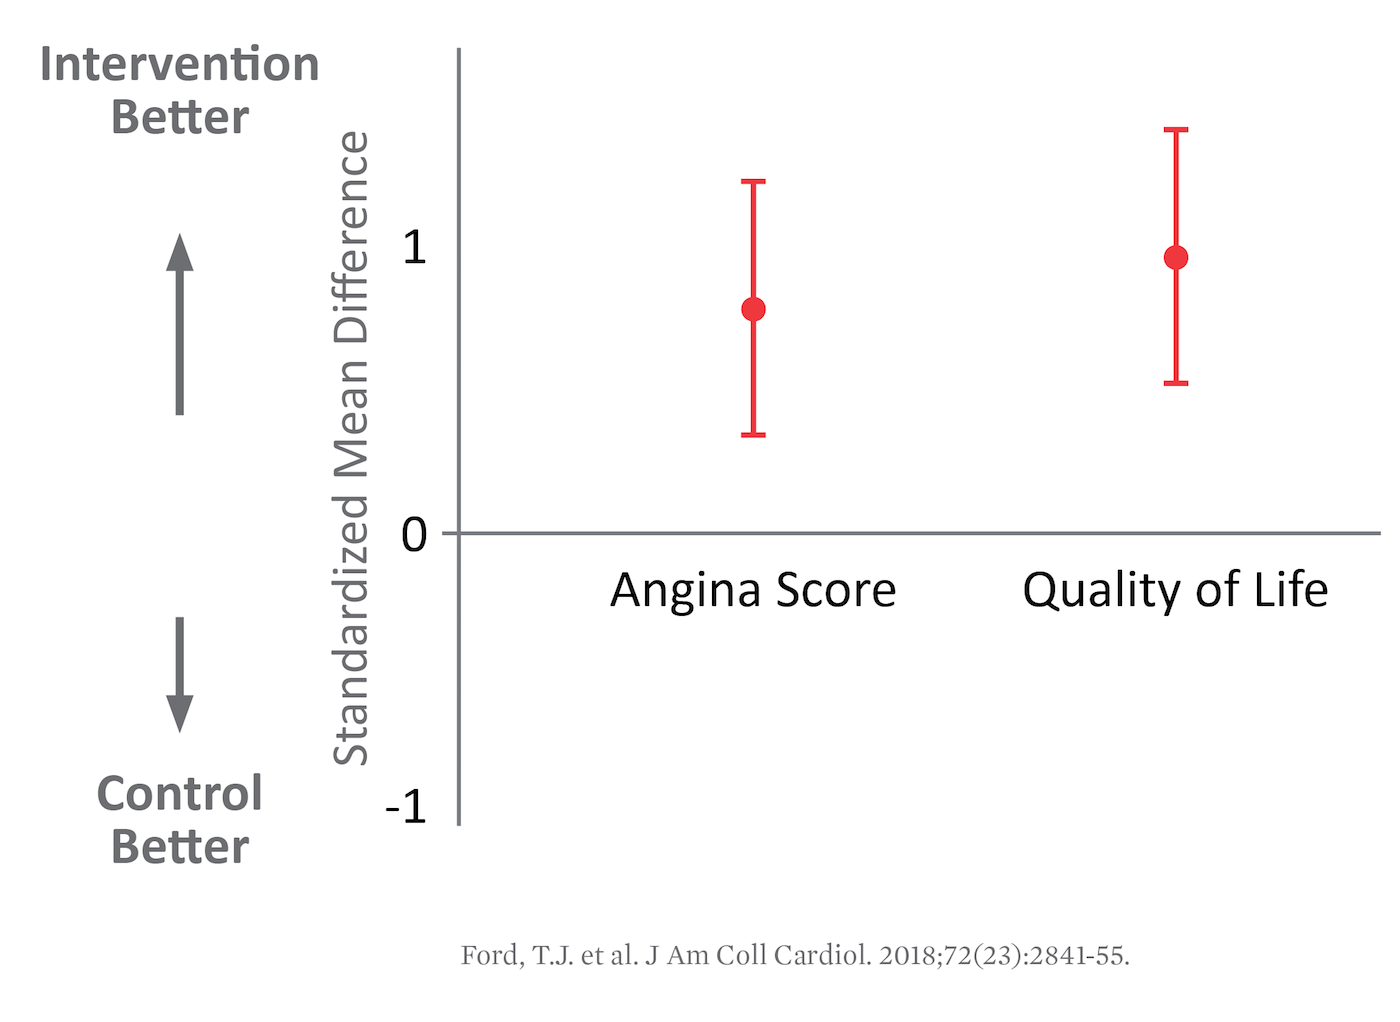 When coronary microvascular disease is treated, patients benefit from improved angina severity and improved quality of life